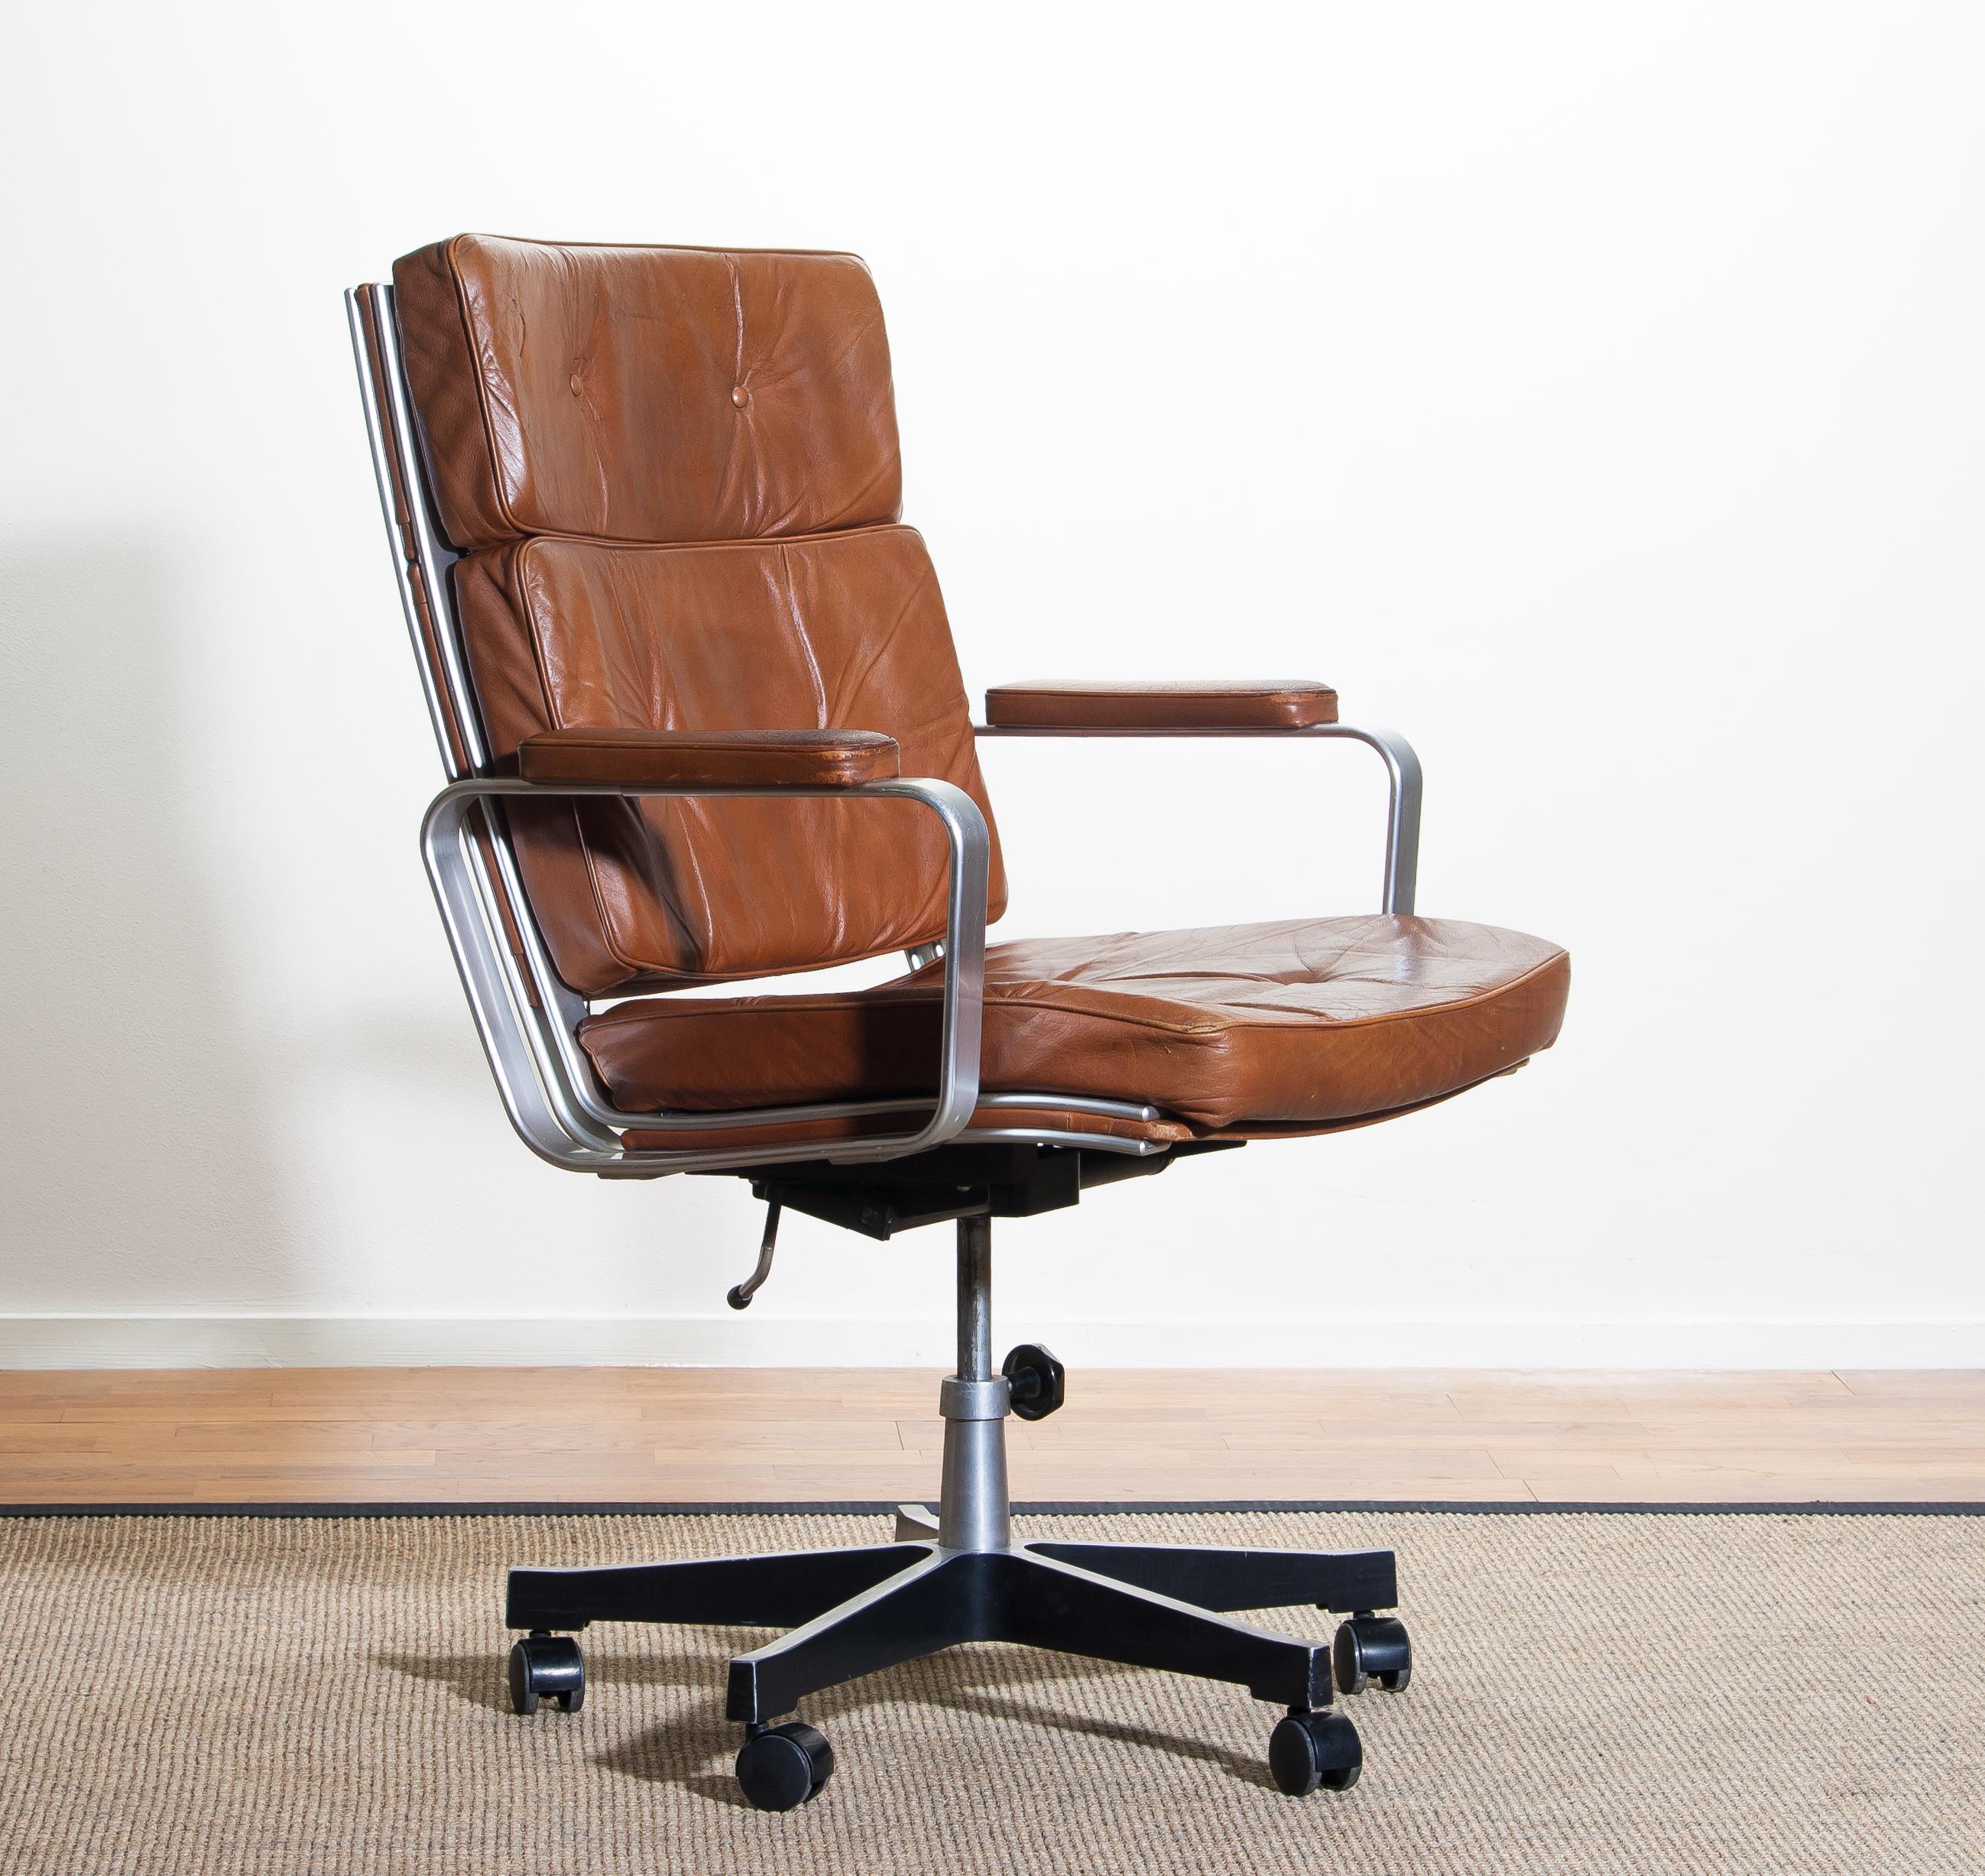 Beautiful adjustable office chair designed by Karl Erik Ekselius for JOC Design.
The nice thick solid brown leather with an aluminium frame on wheels is in good condition.
The chair is extremely comfortable and newly filed. Repairs to the top